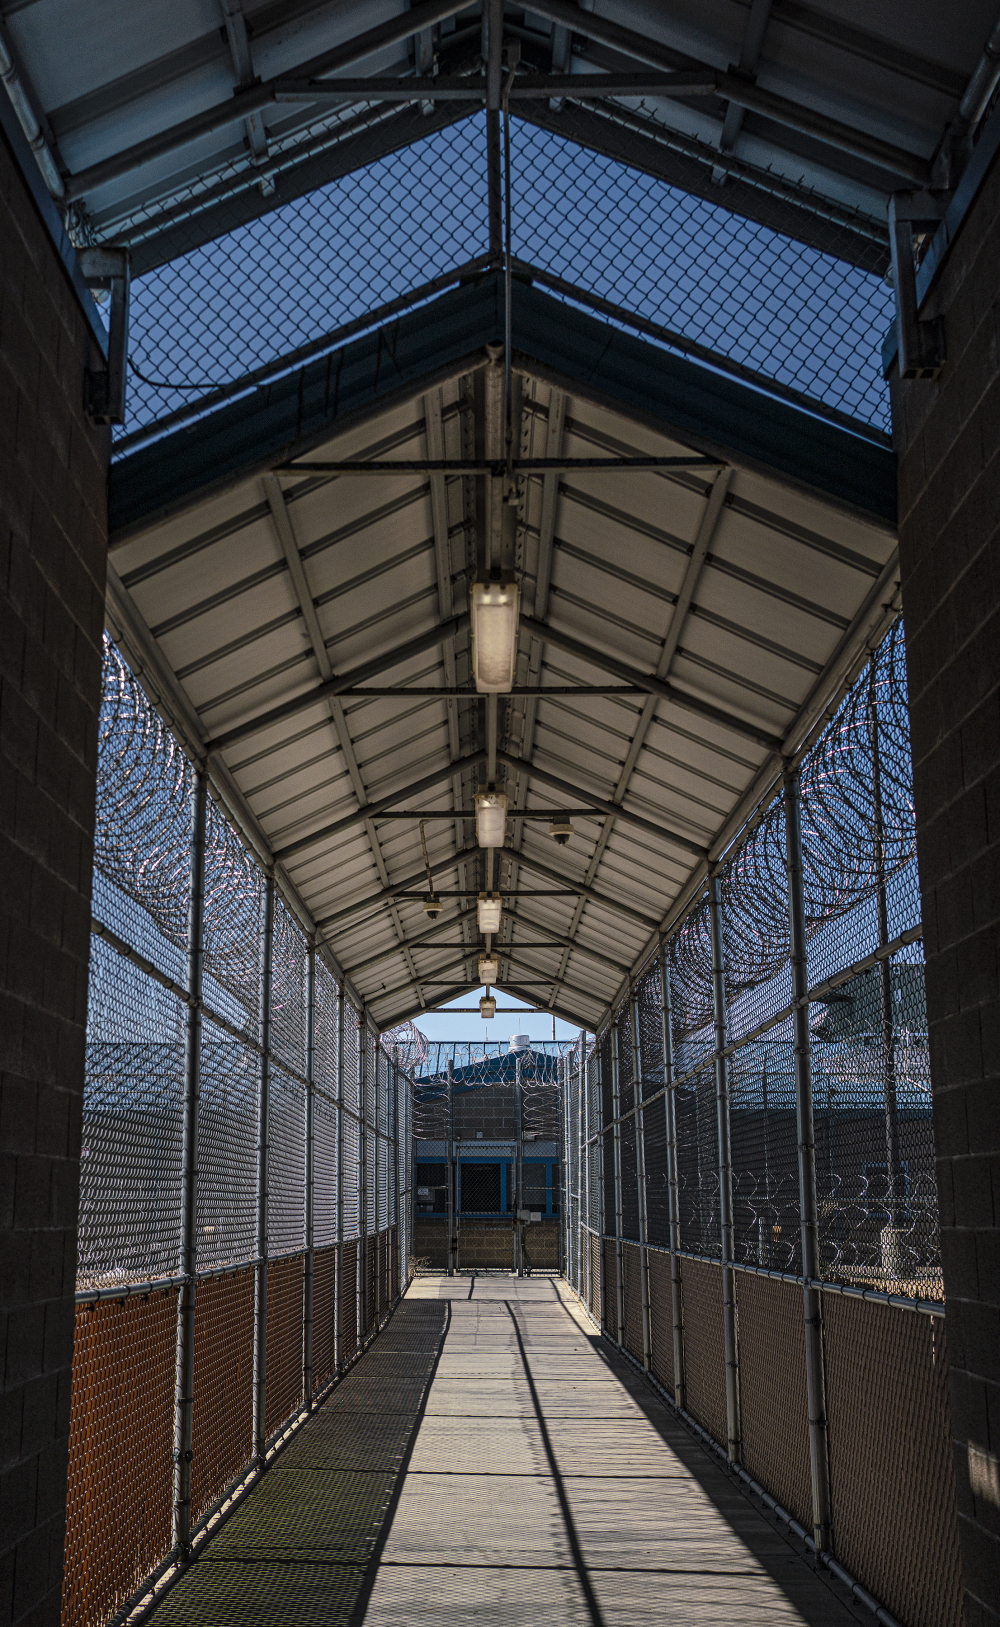 New Mexico jail: Long, outdoor cement sidewalk completely enclosed with chain link fence topped by barbed wire that meets the peaked metal roof